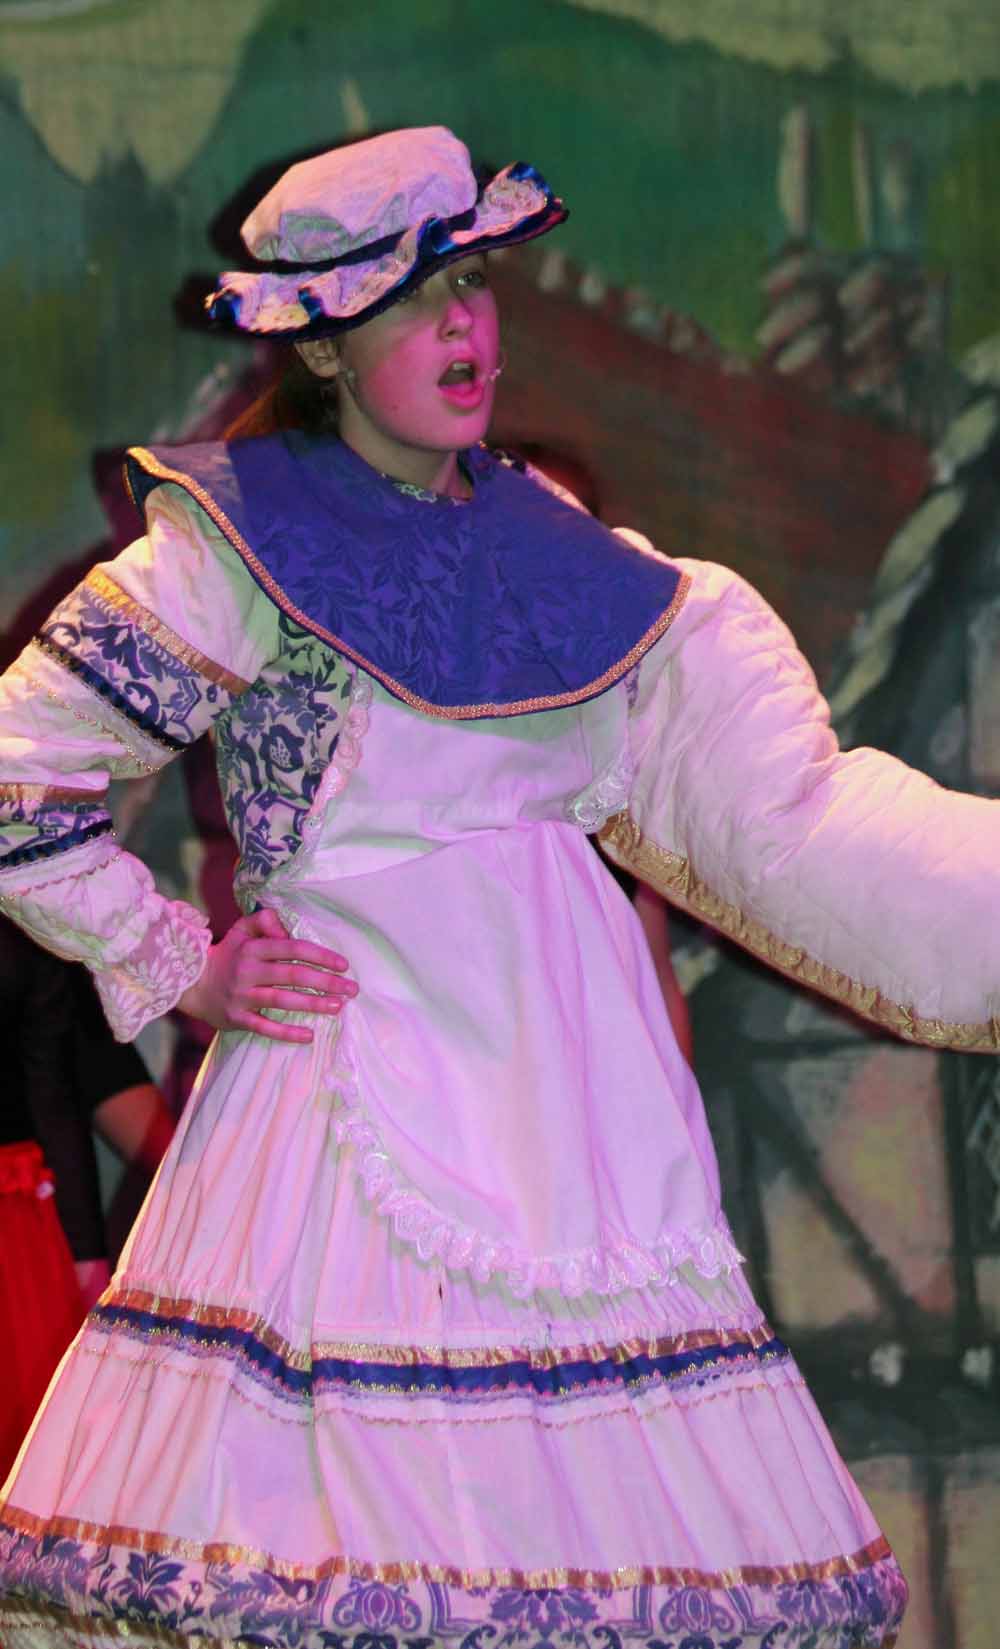 Year 8 Production of Beauty and The Beast, February 2015